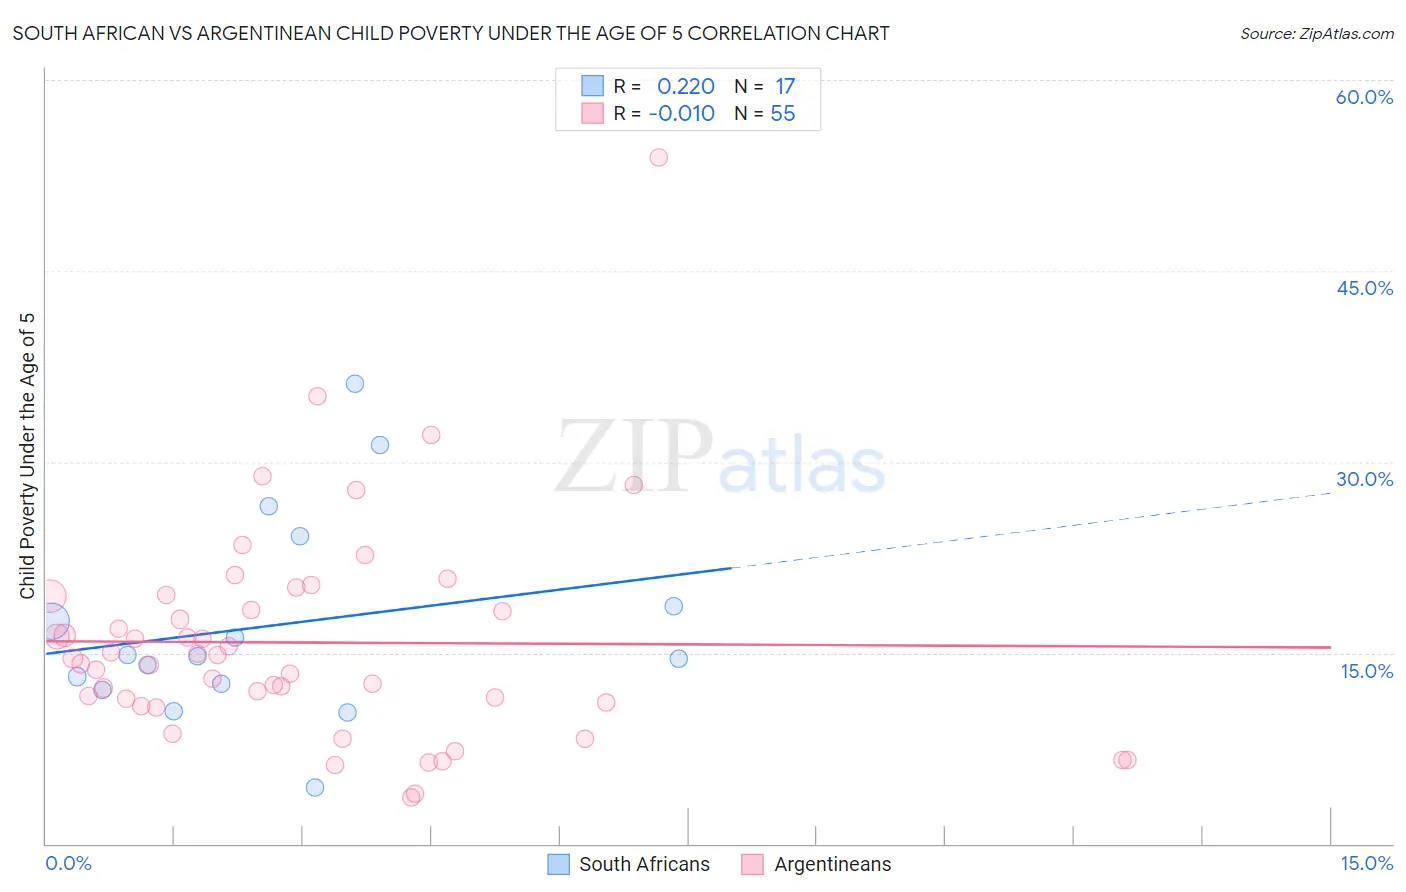 South African vs Argentinean Child Poverty Under the Age of 5